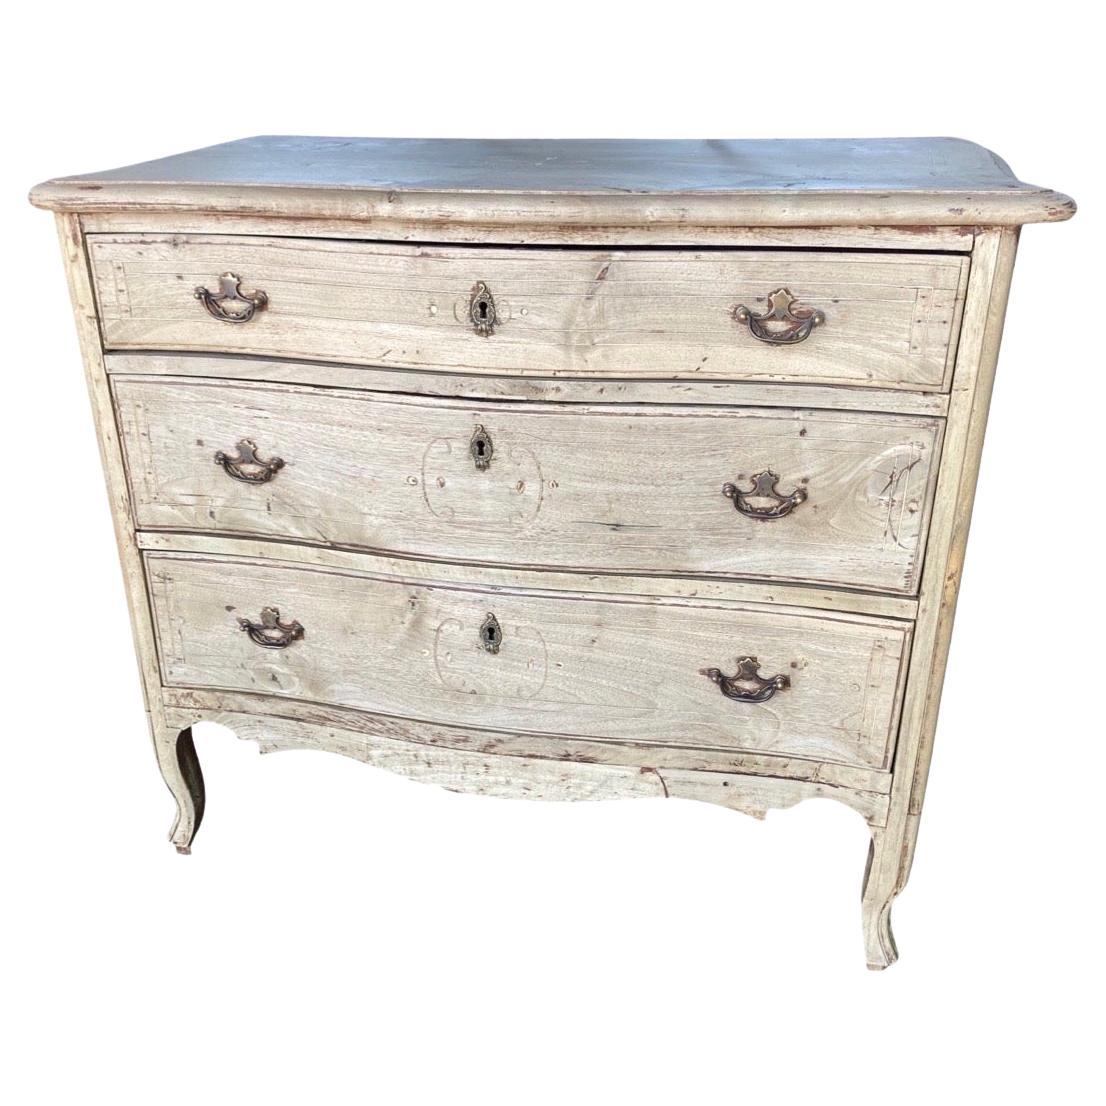 18th Century Italian Bleached Walnut Serpentine Front Commode / Chest of Drawers